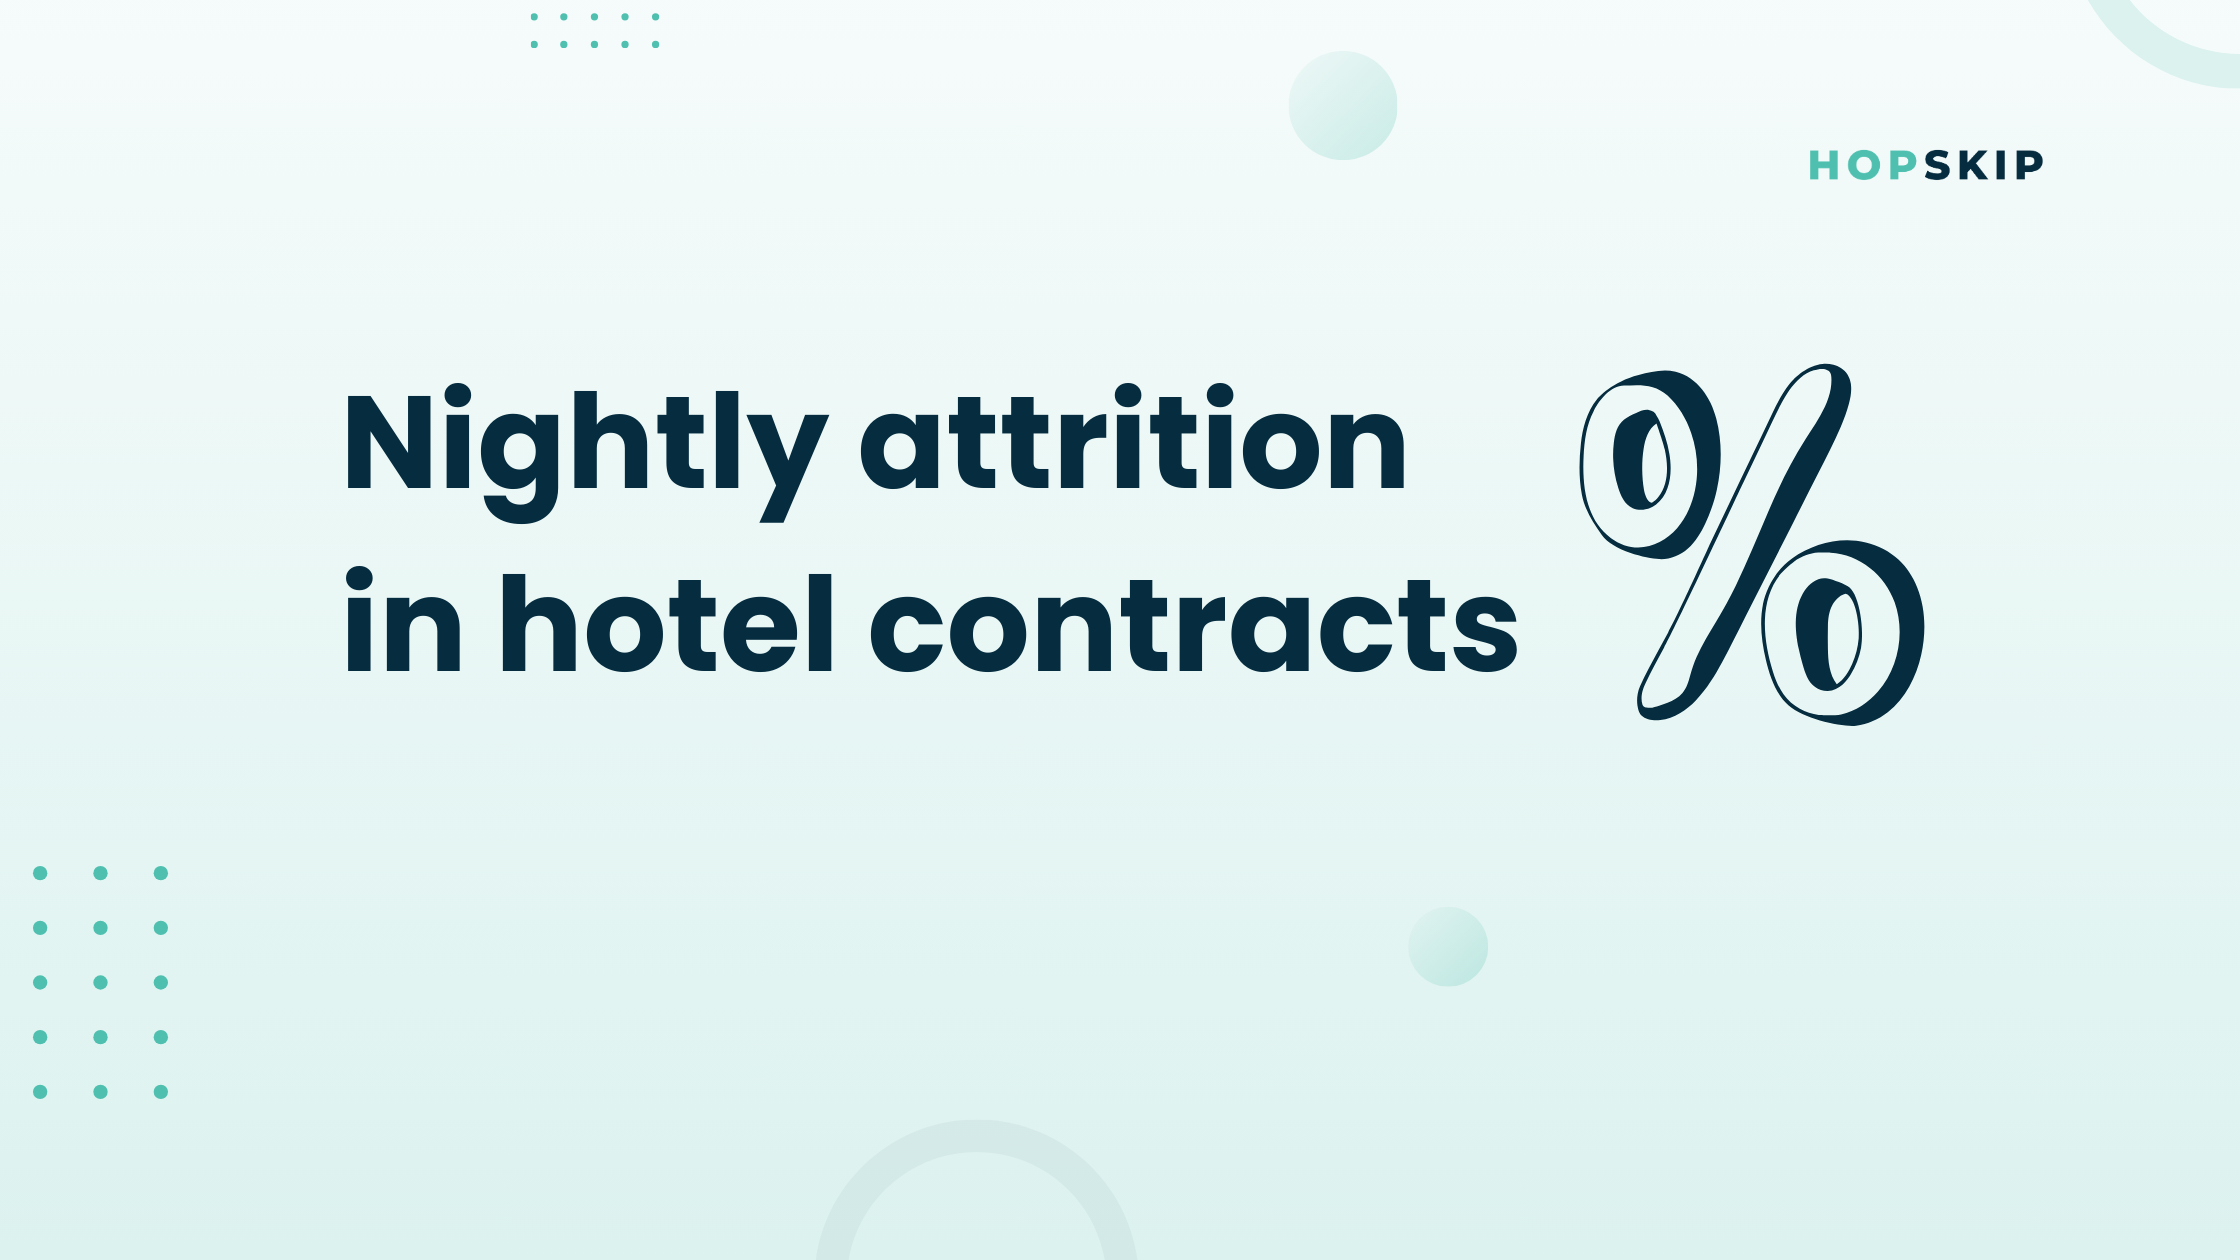 Nightly attrition in hotel contracts